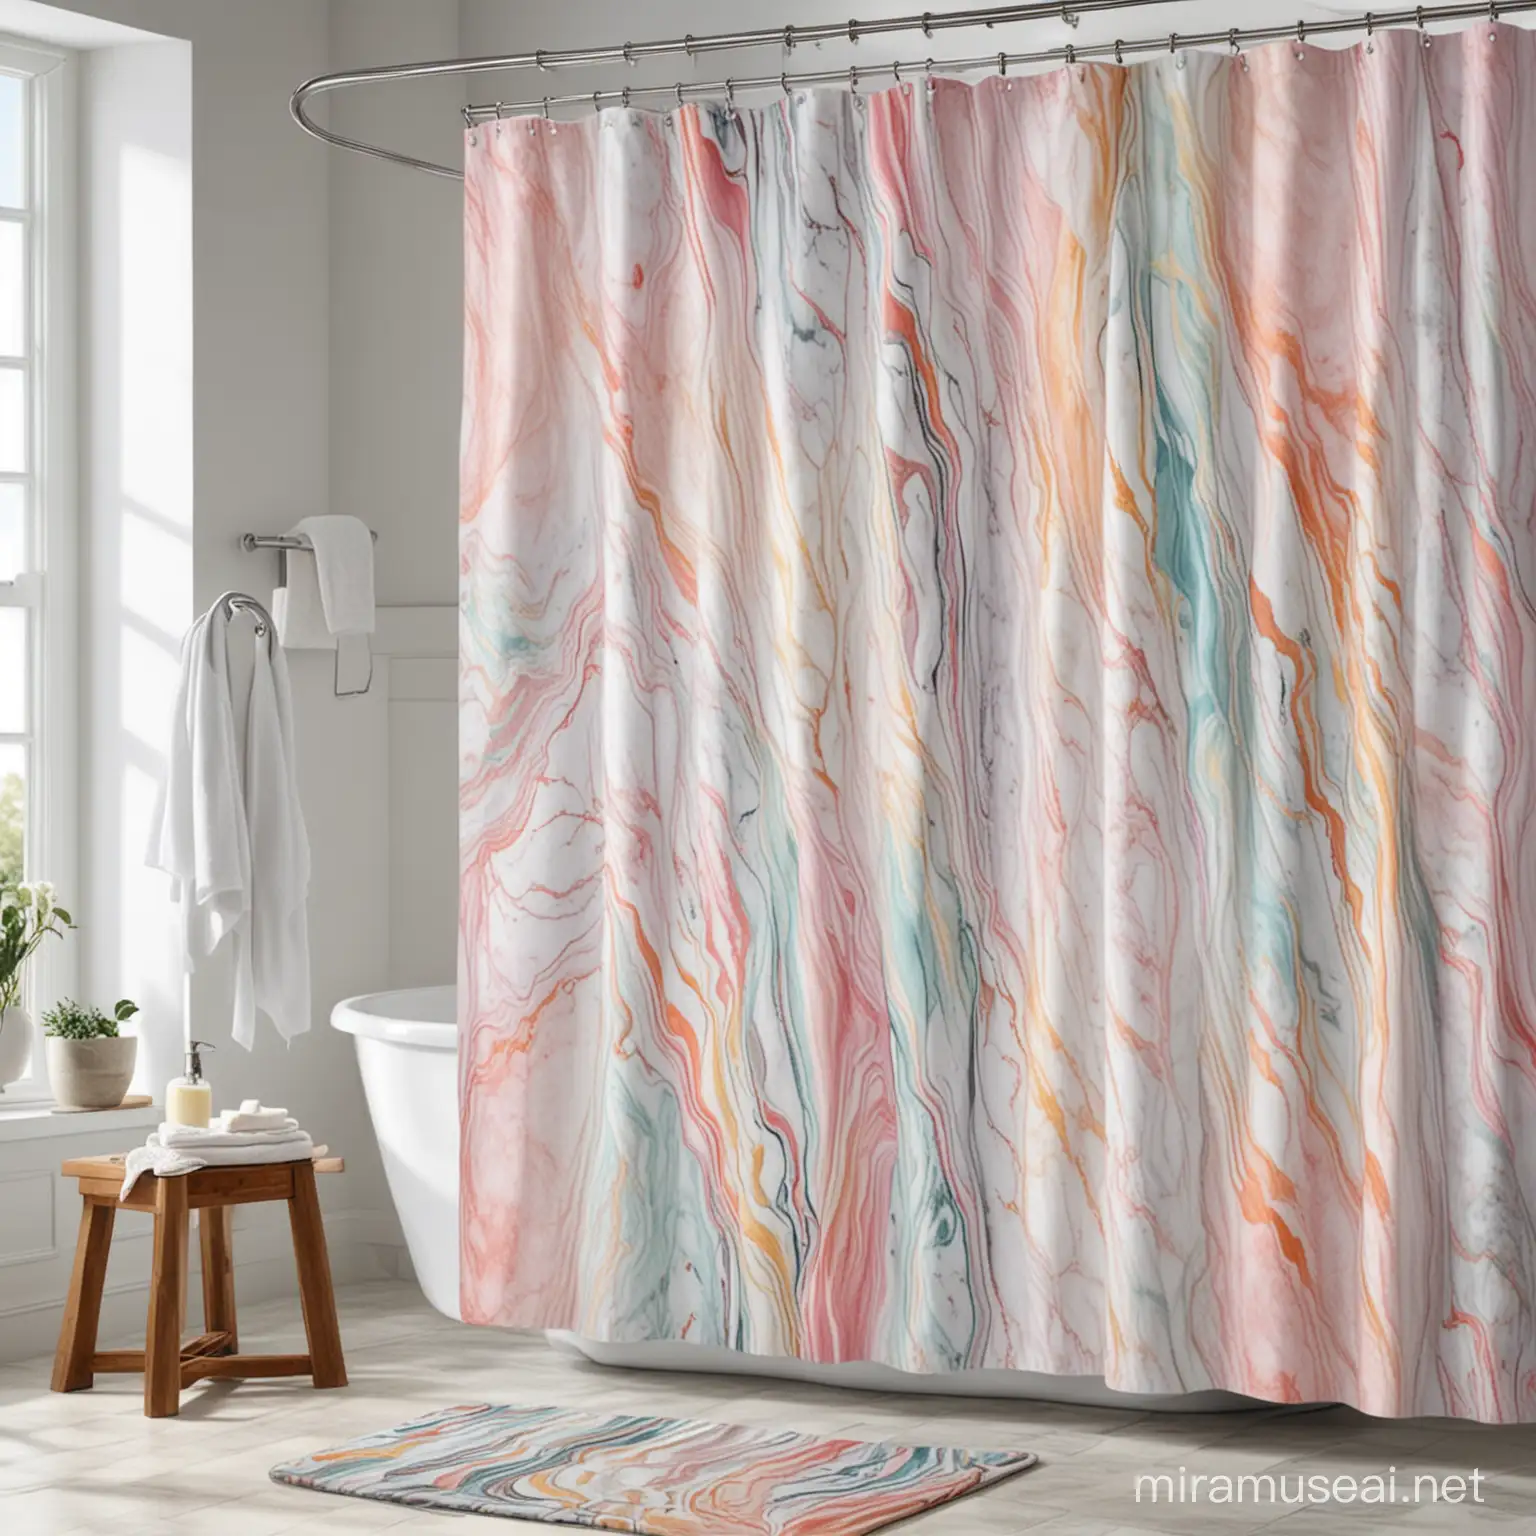 Vibrant Marble Multicolored Shower Curtains Adorning Modern Bathroom